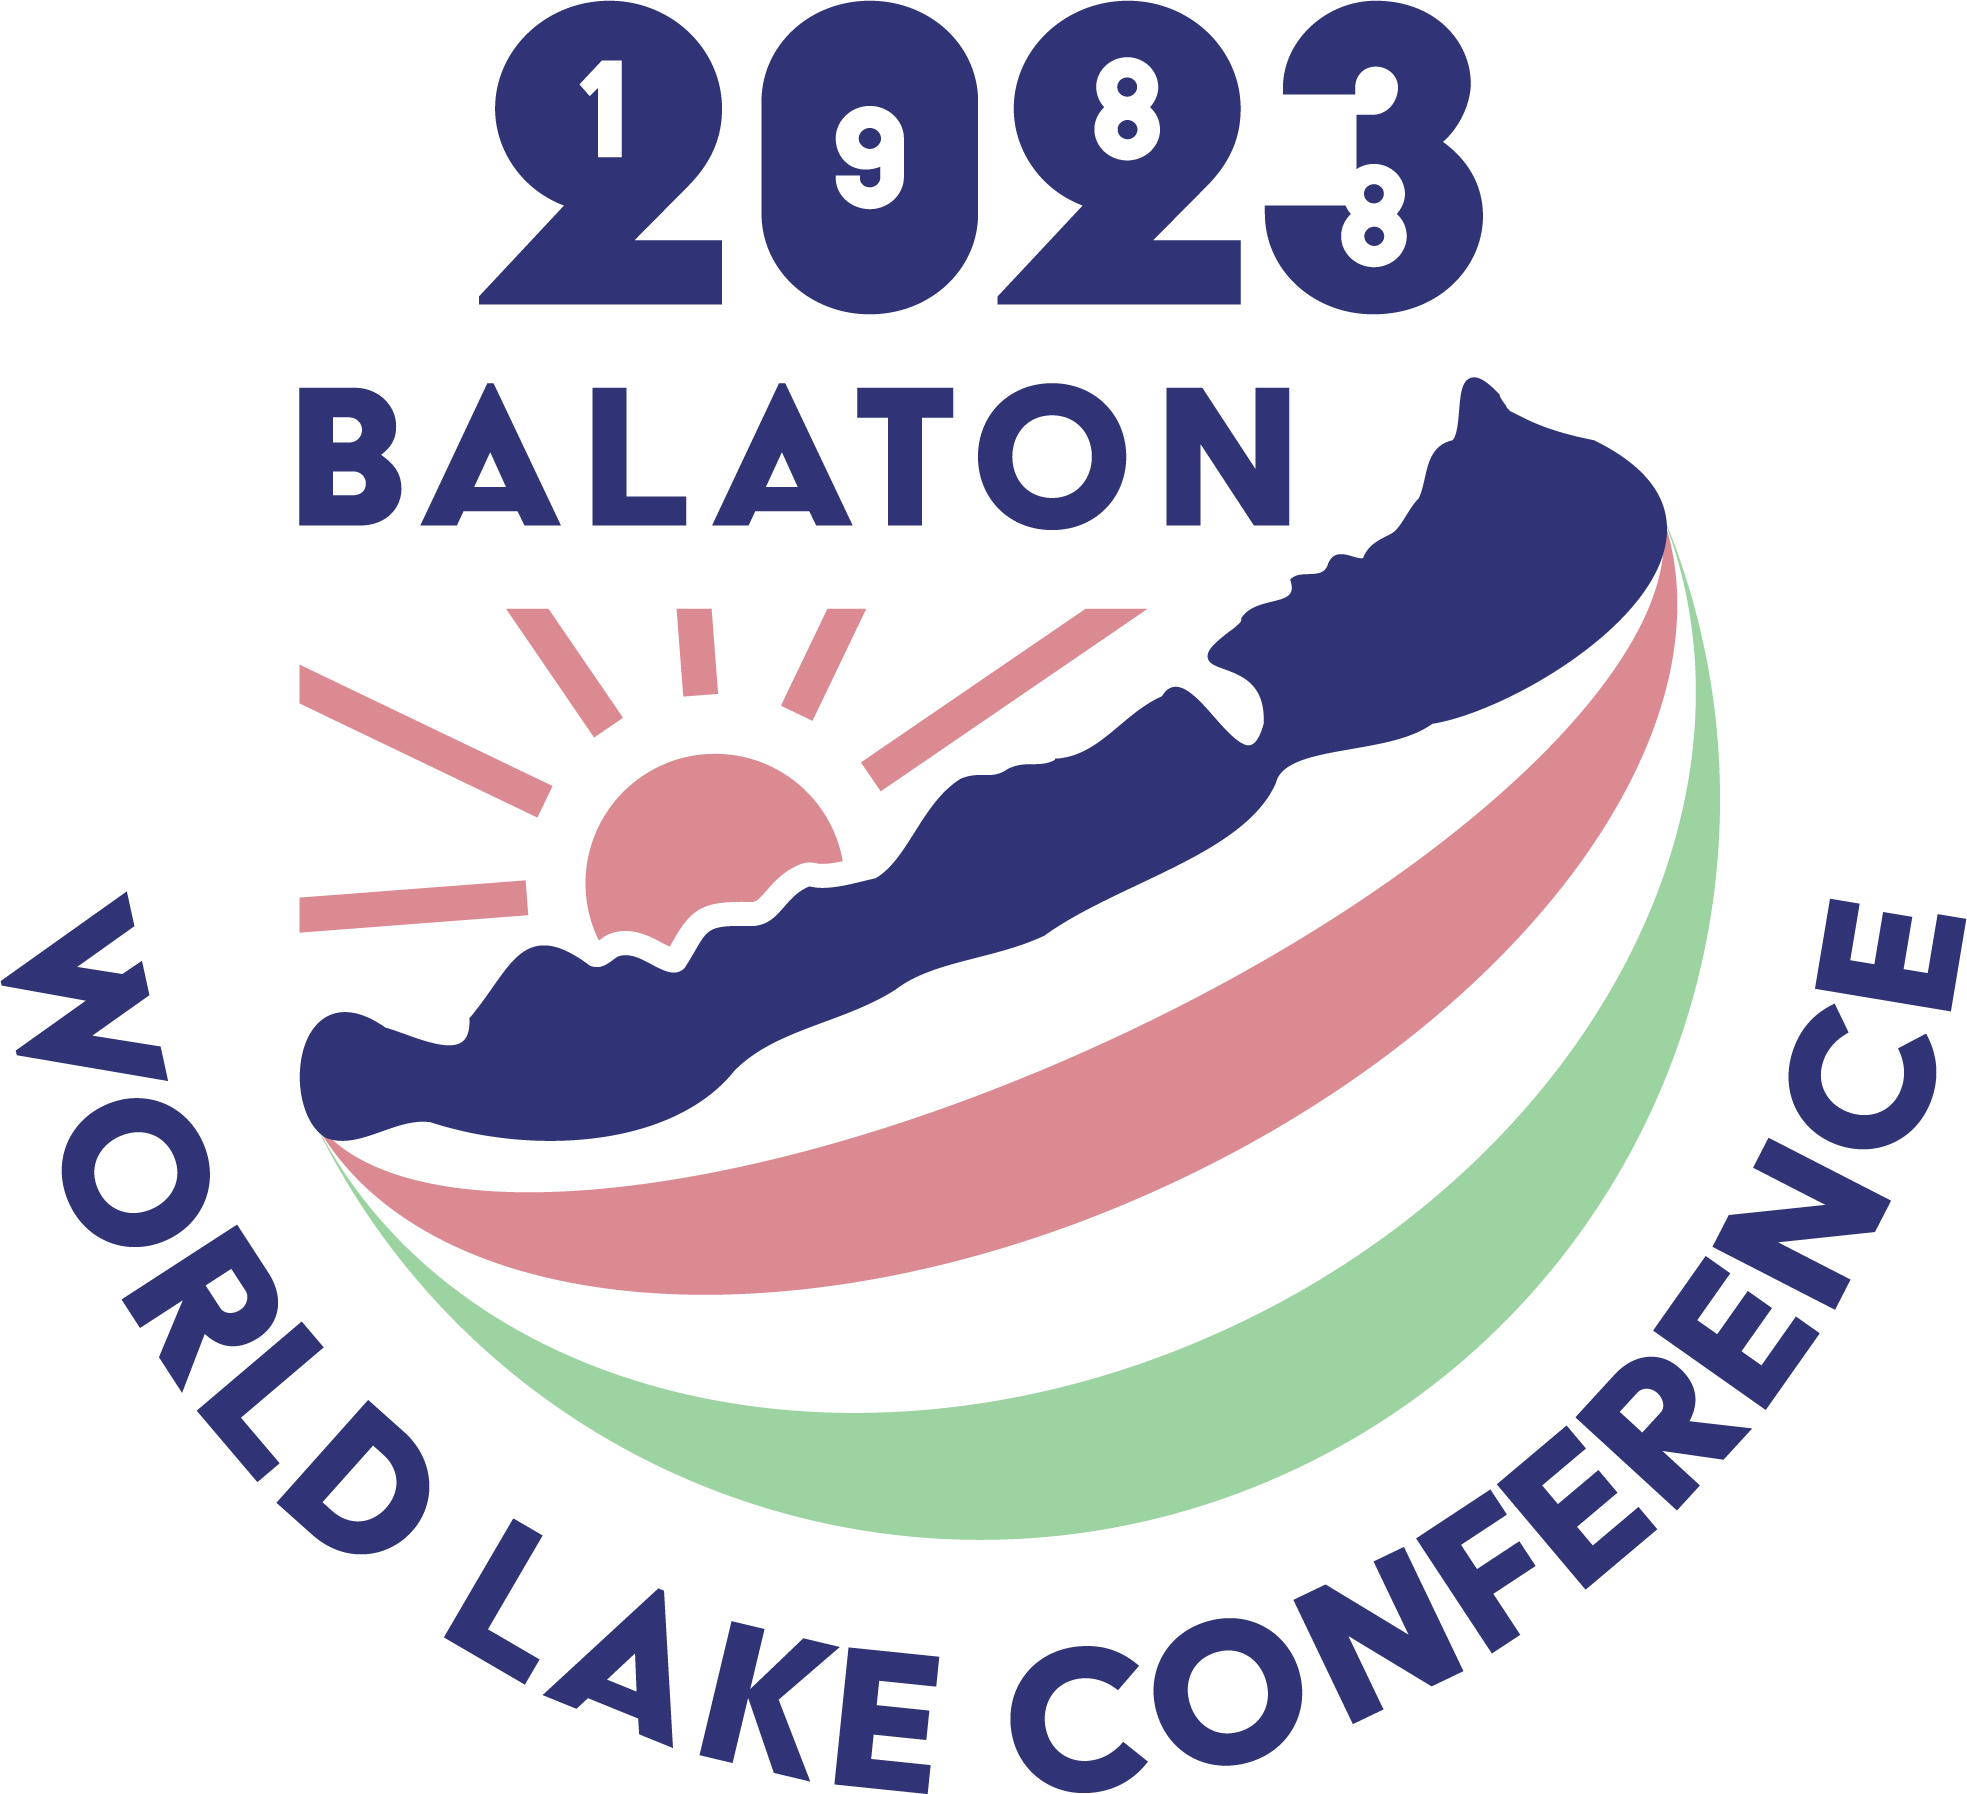 The deadline for abstract submission for the 19th World Lake Conference is approaching!